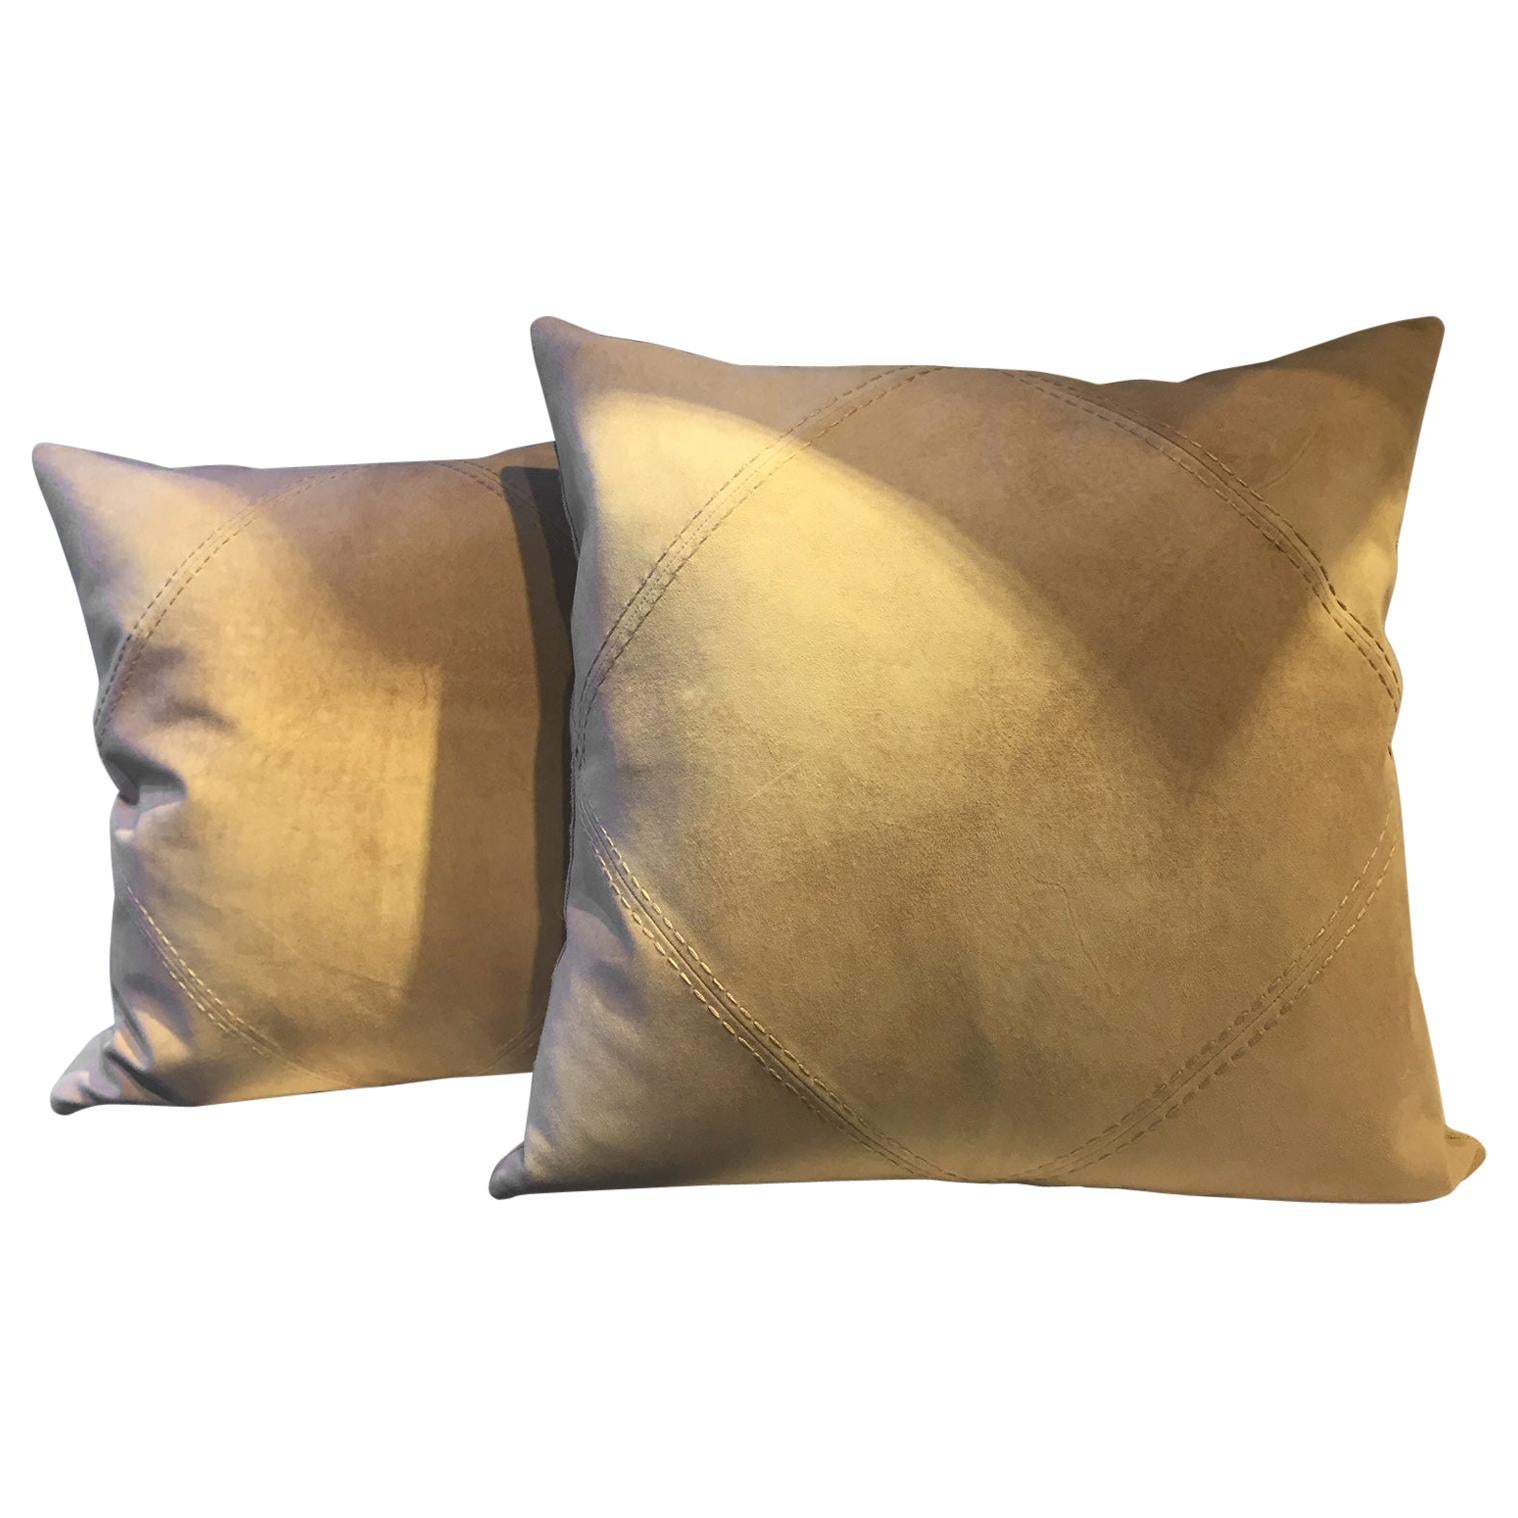 Pair of Suede Leather Cushions Color Sand Hand Saddle Stitched Rhombus Detail